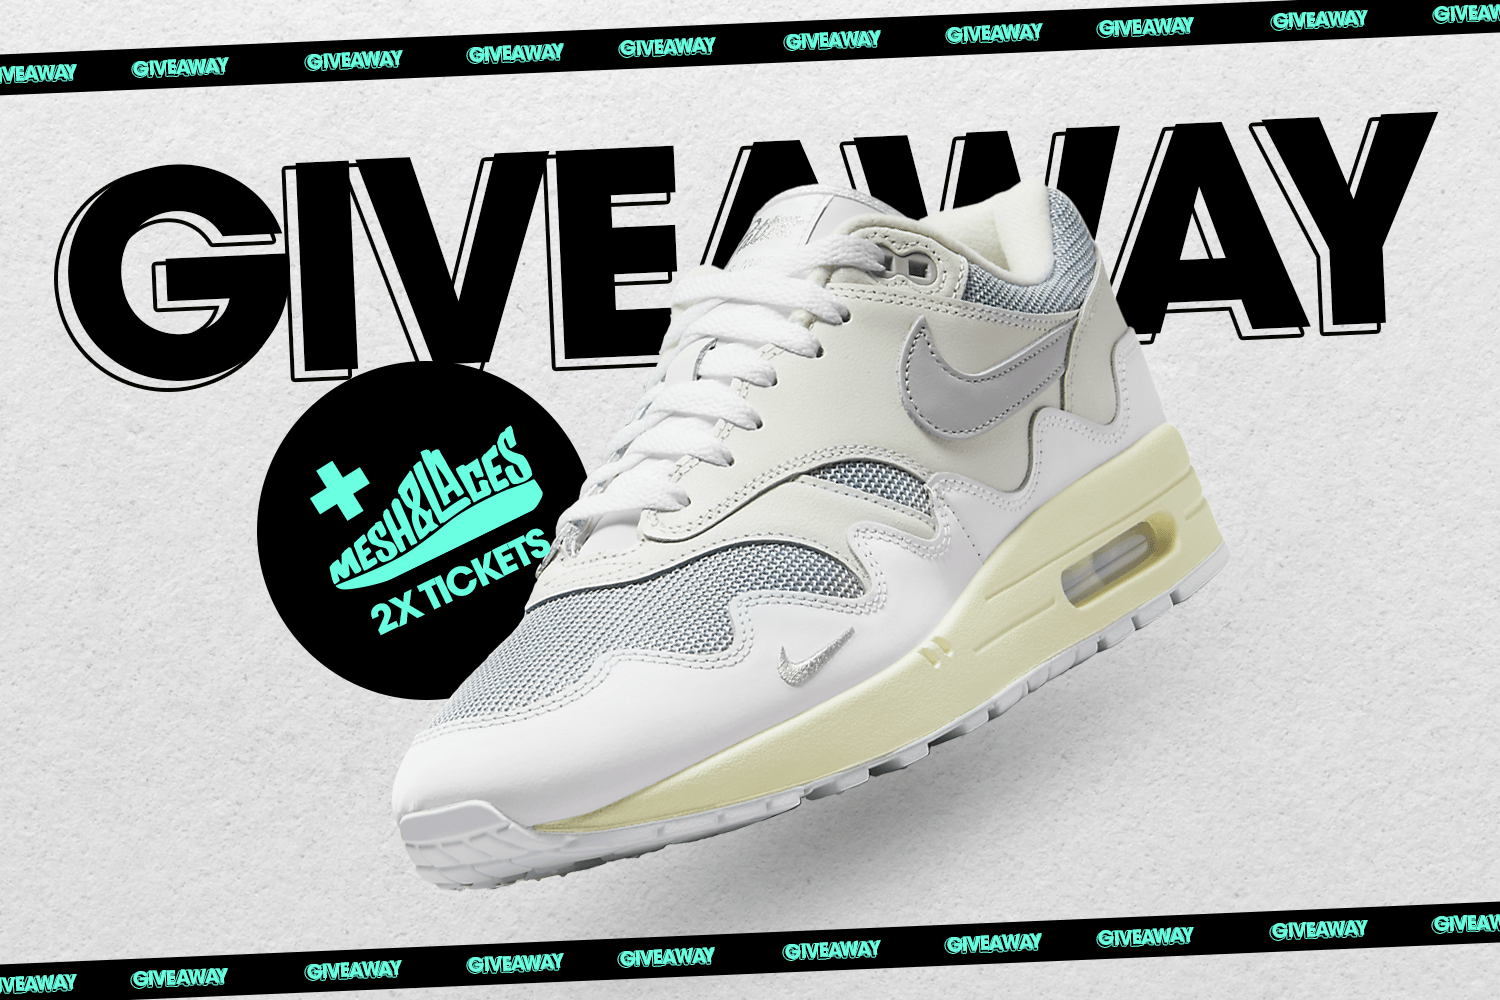 Sneakerjagers is coming up with a Mesh & Laces giveaway